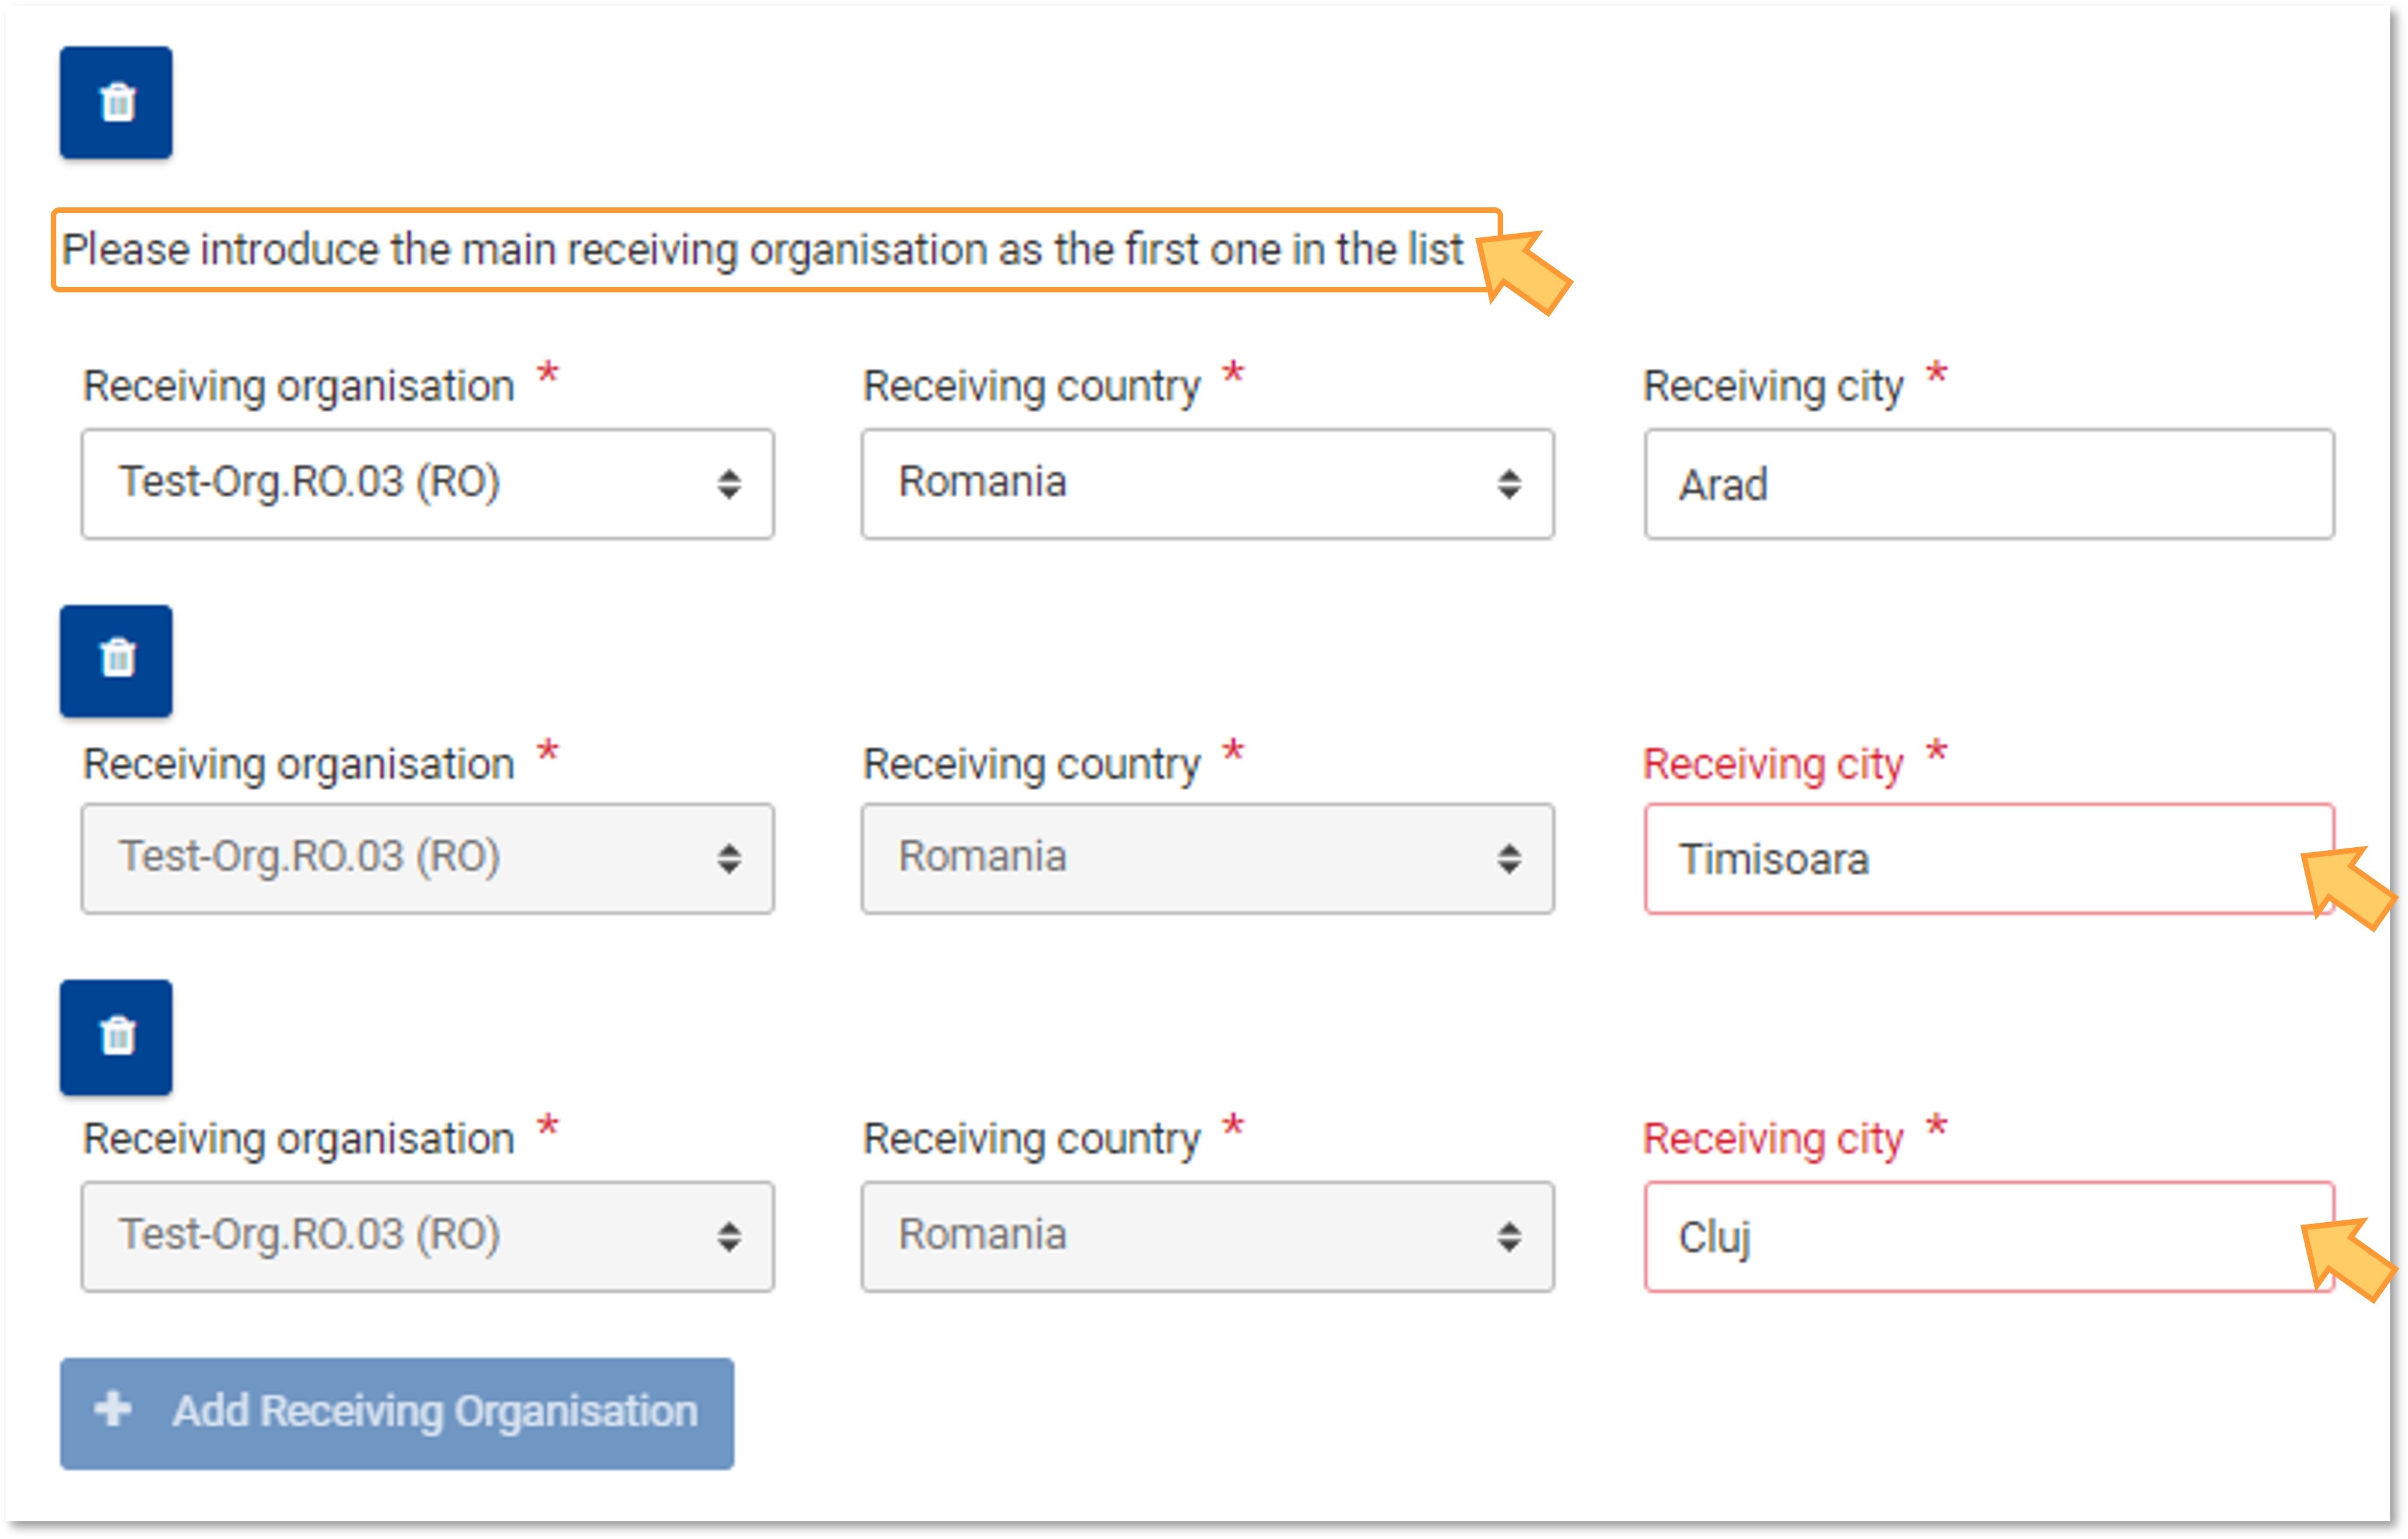 Add new locations for the main receiving organisation